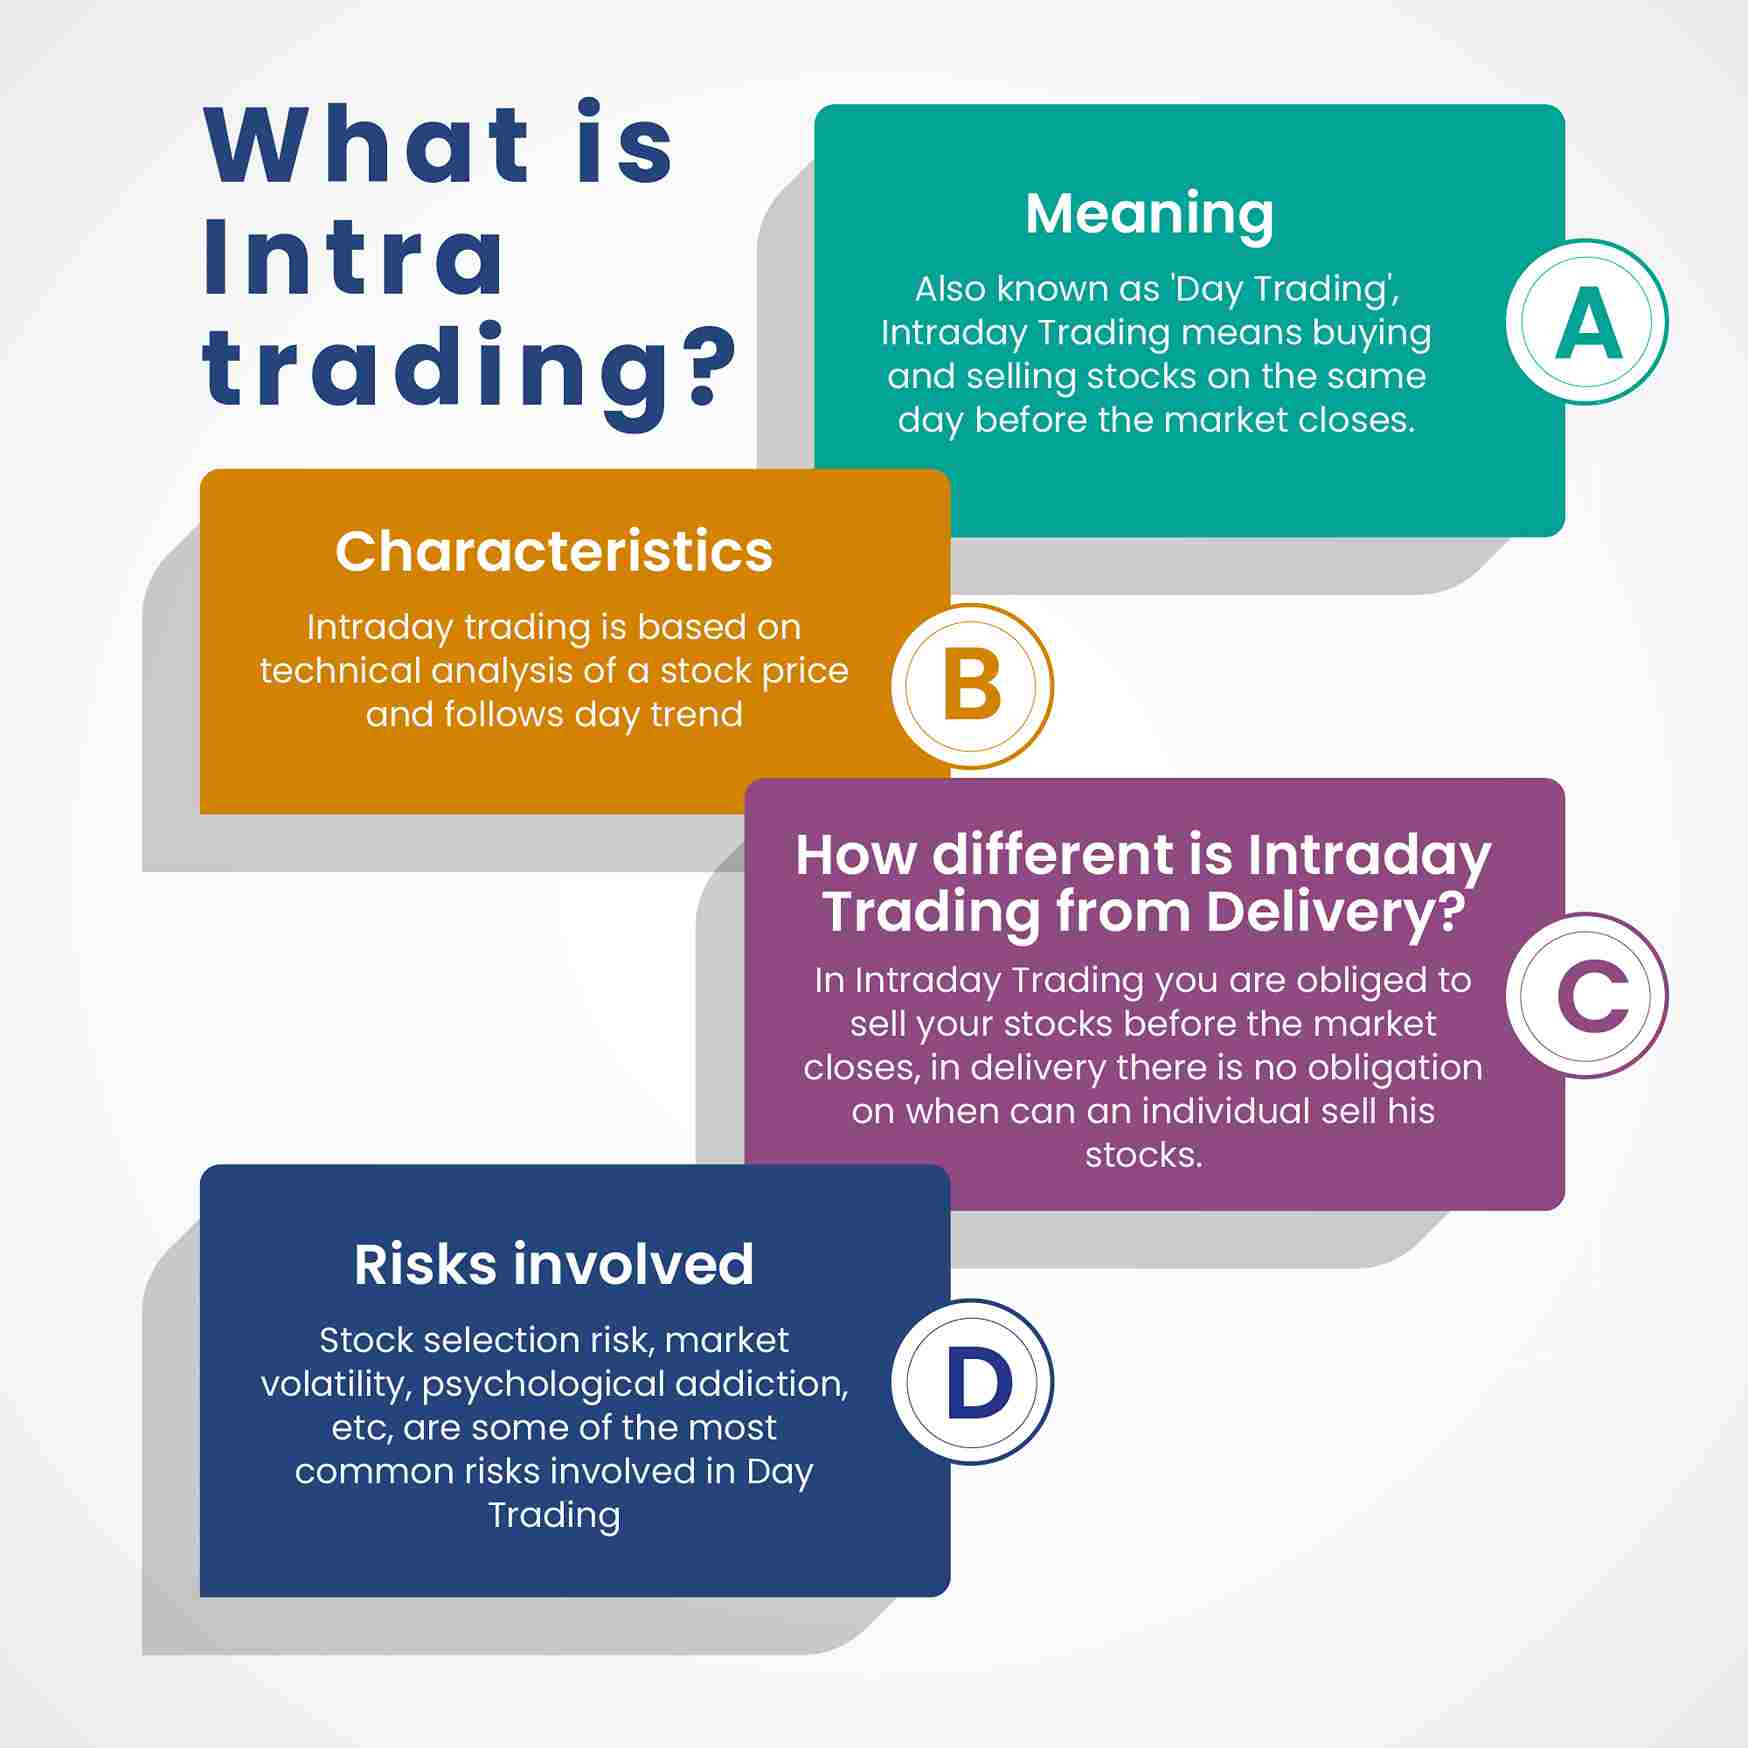 What is Intra trading